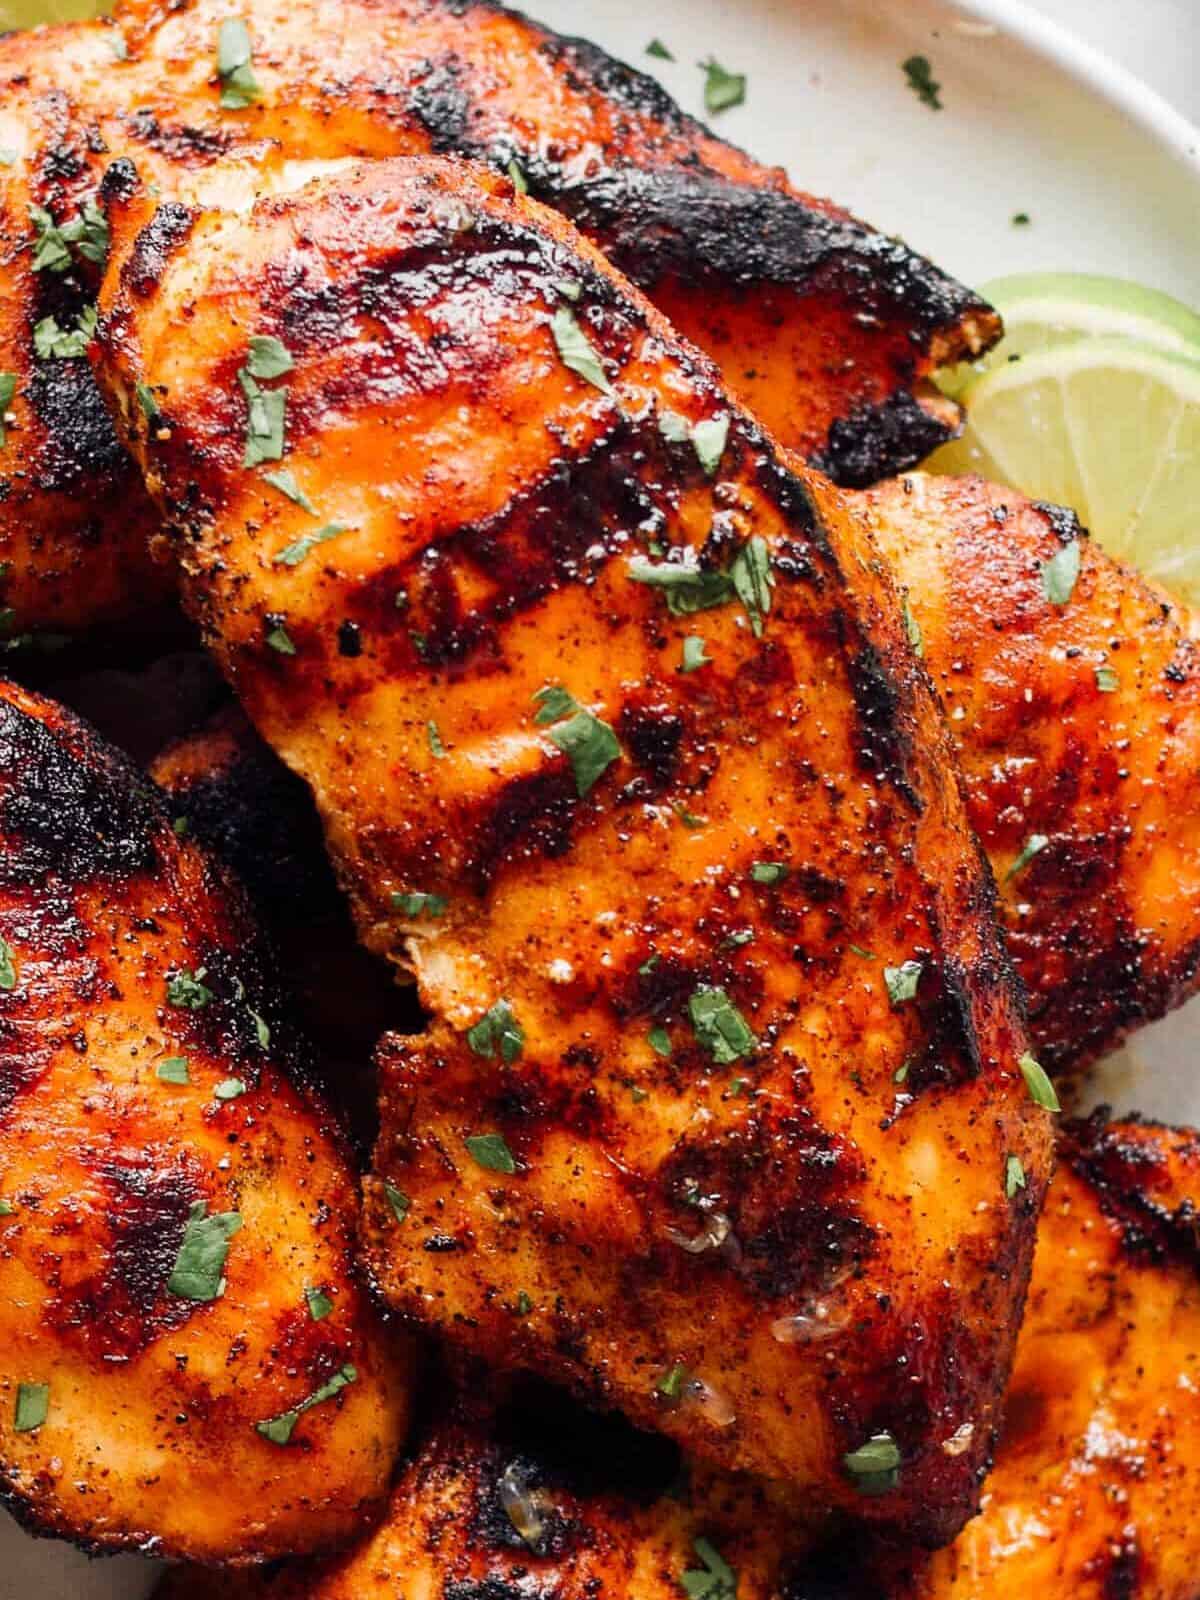 up close image of grilled chicken breast with marinade